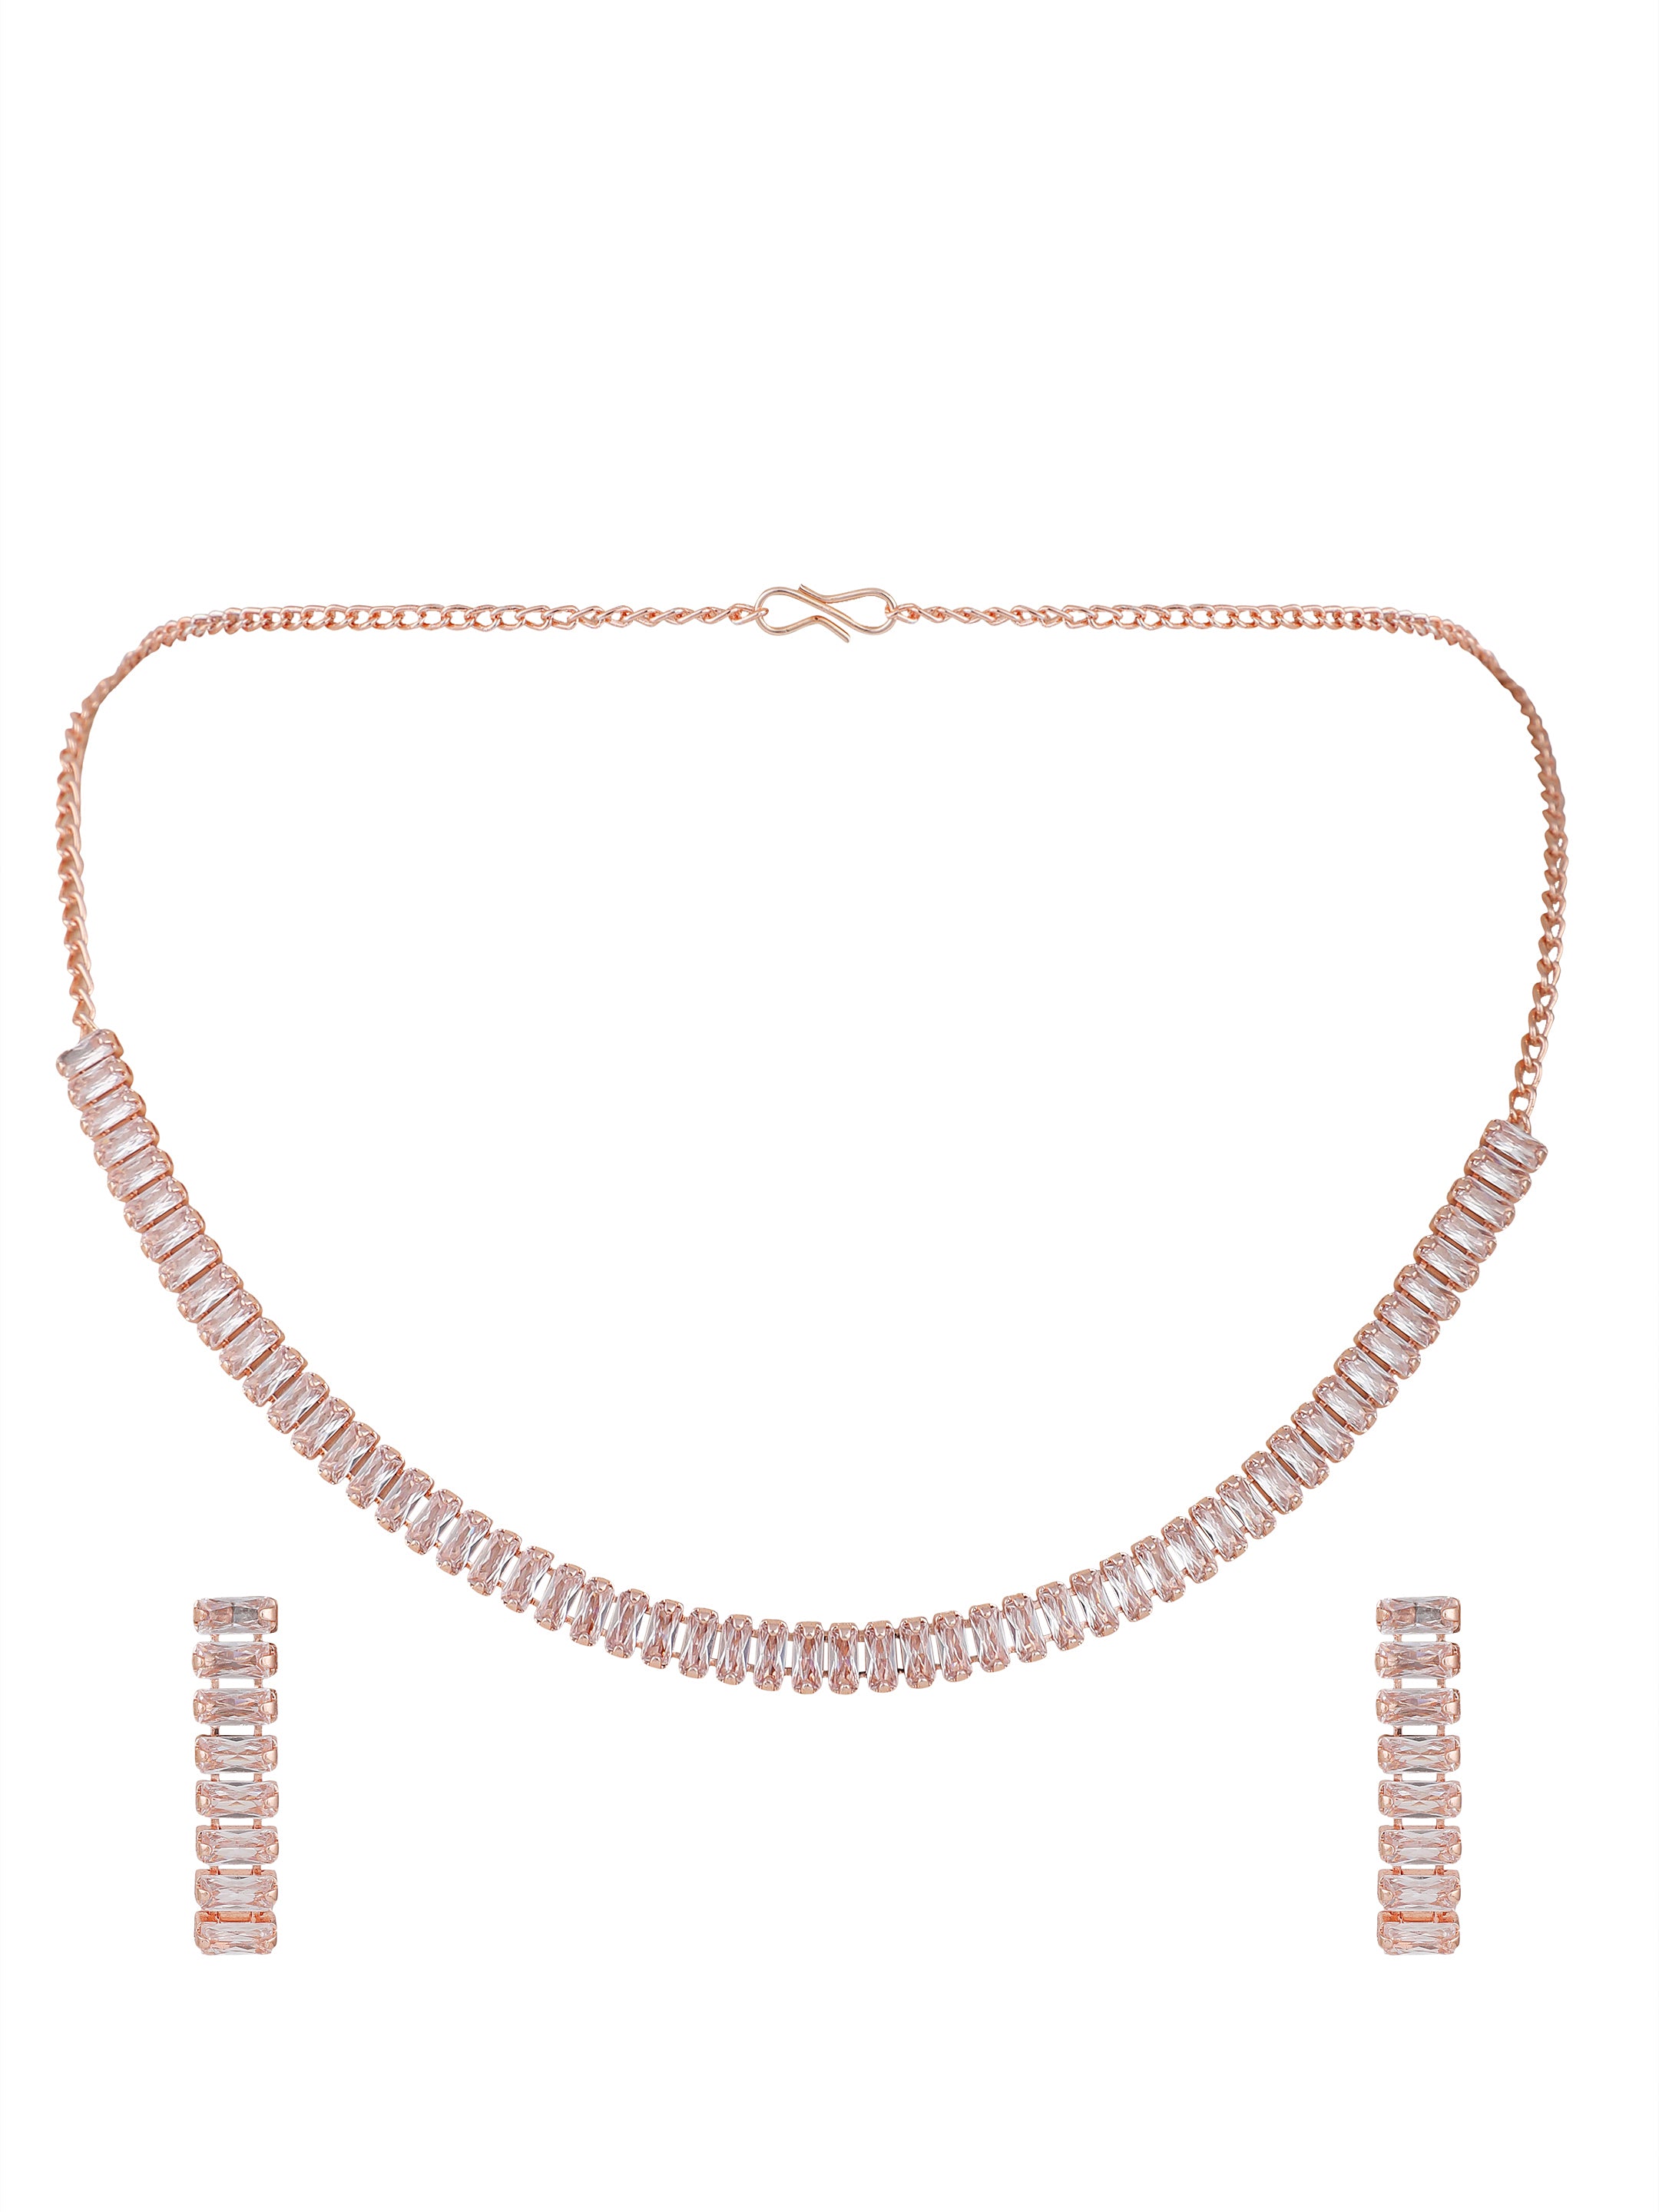 Women's Ad Rose Gold Necklace Set - Zaffre Collections